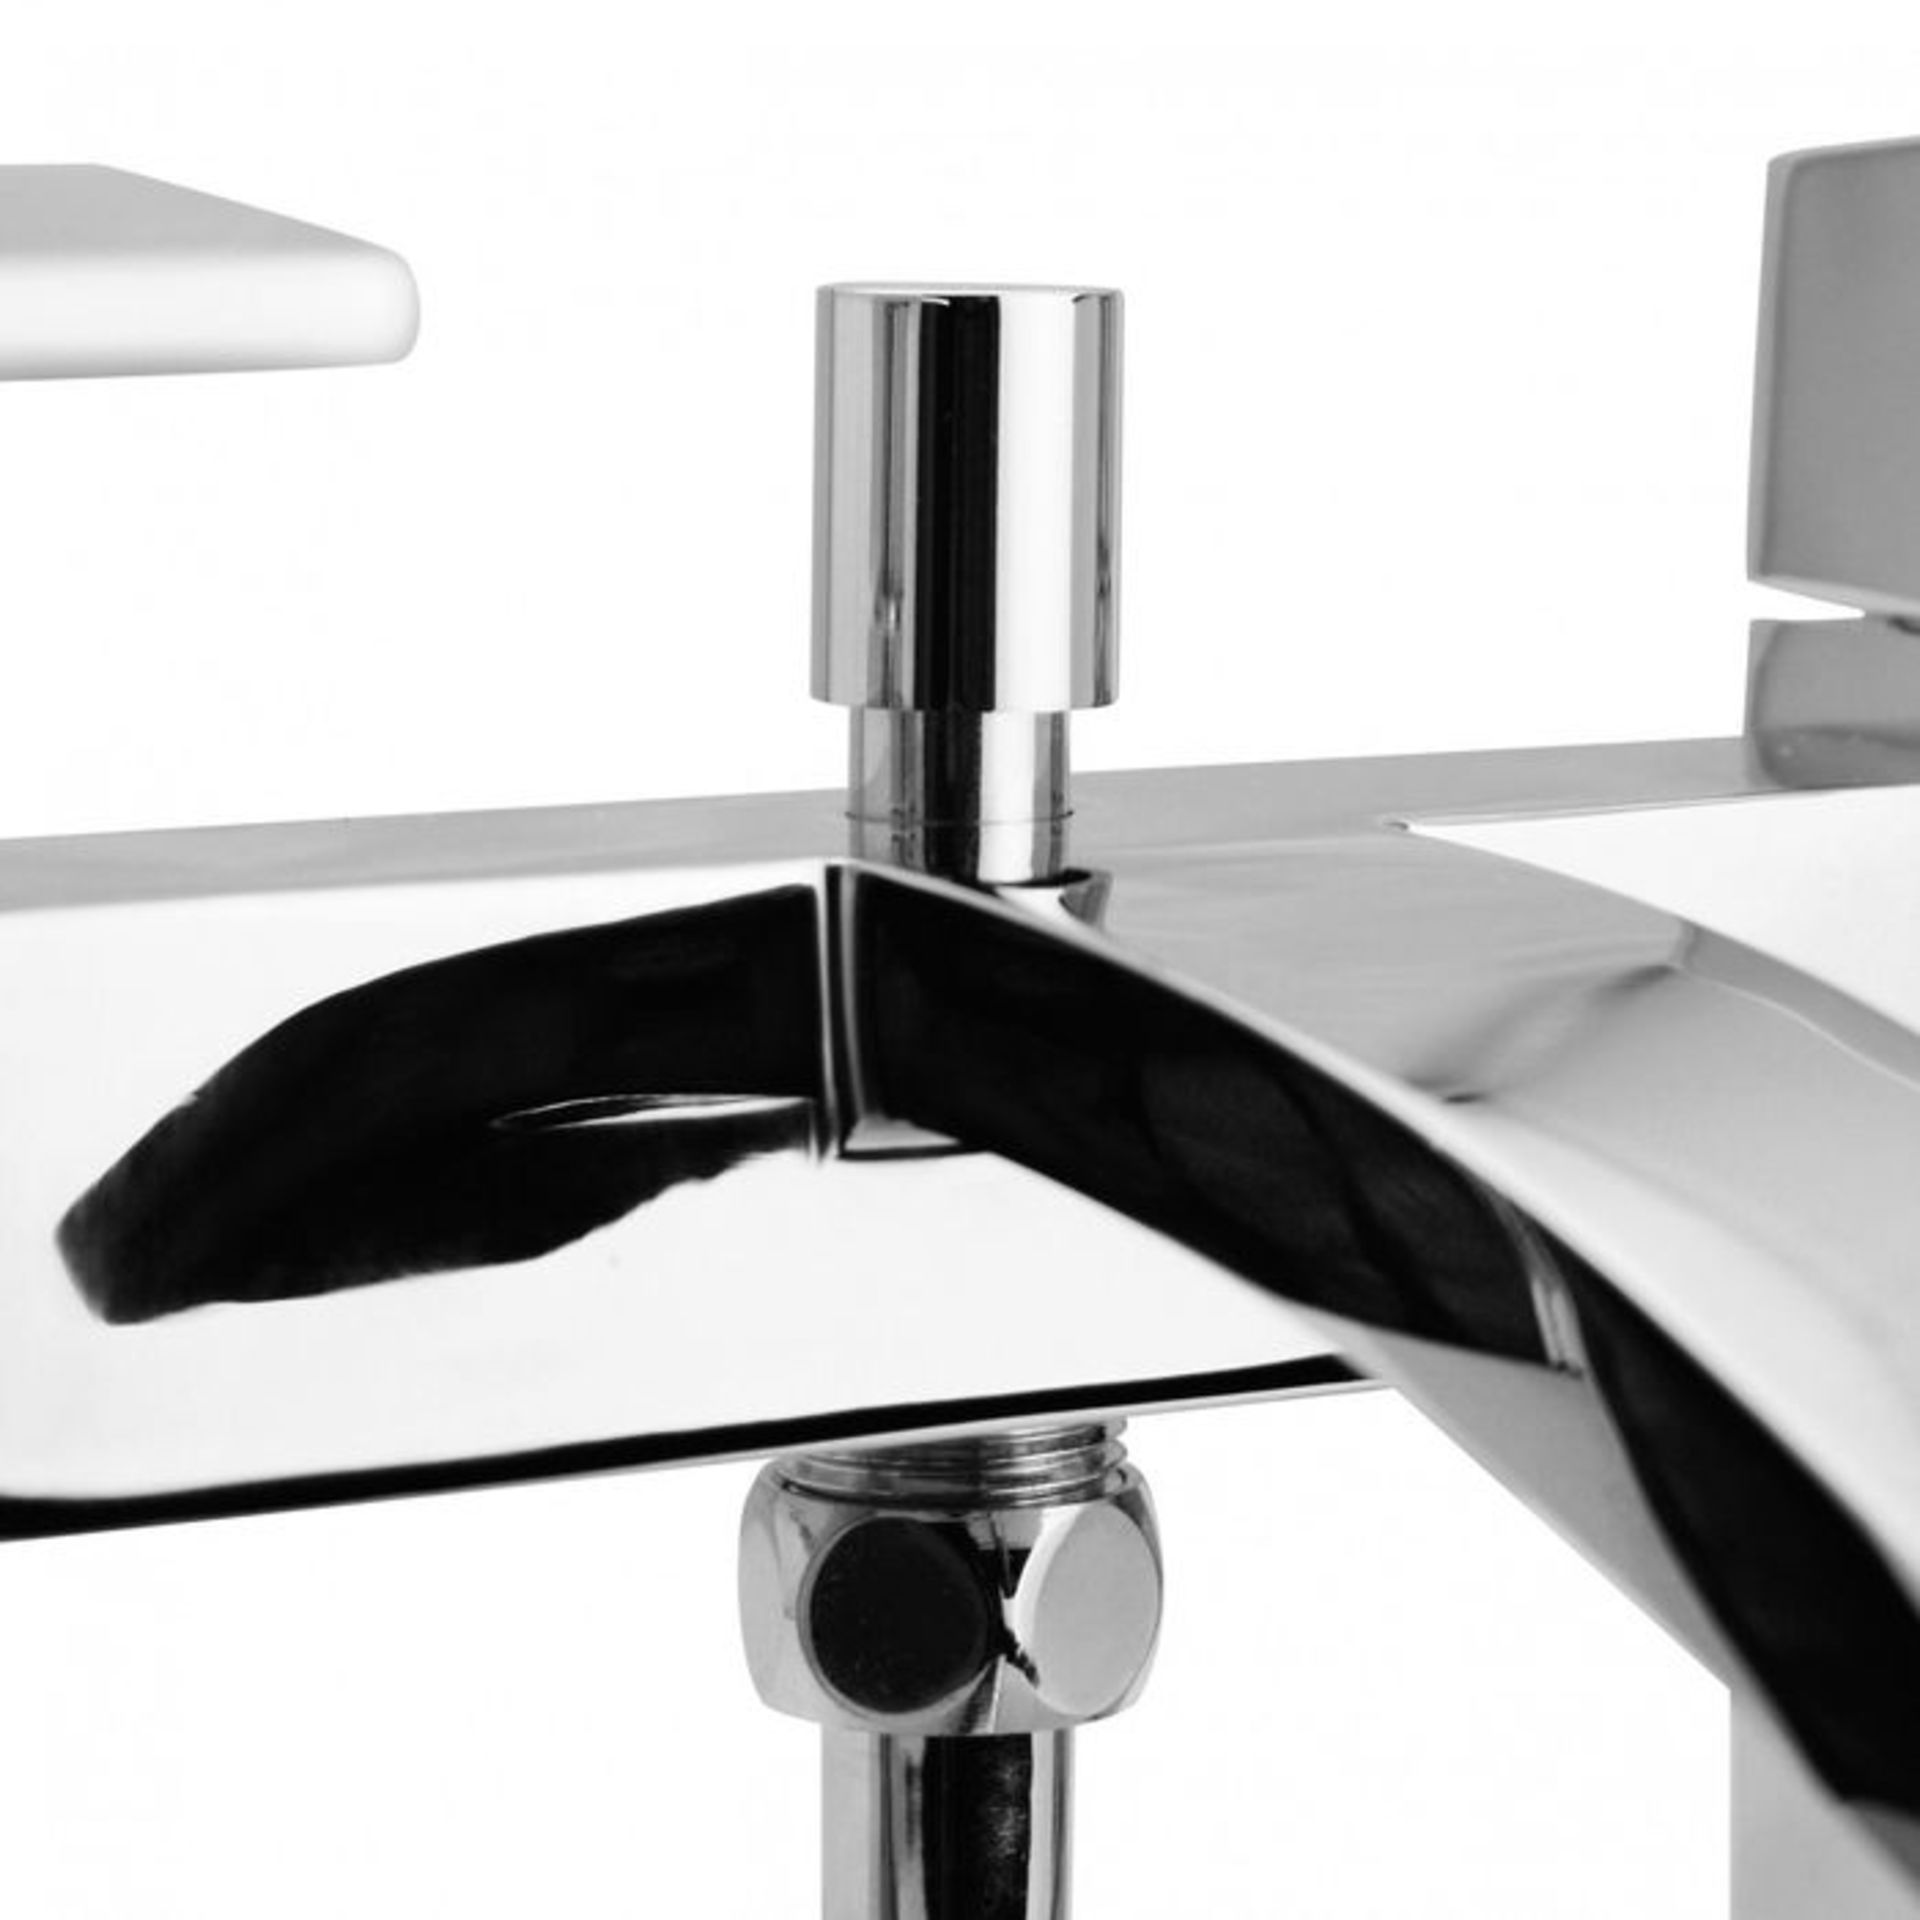 (V185) Keila Bath Mixer Tap with Hand Held Shower RRP £199.99 Chrome Plated Solid Brass 1/4 turn - Image 3 of 3